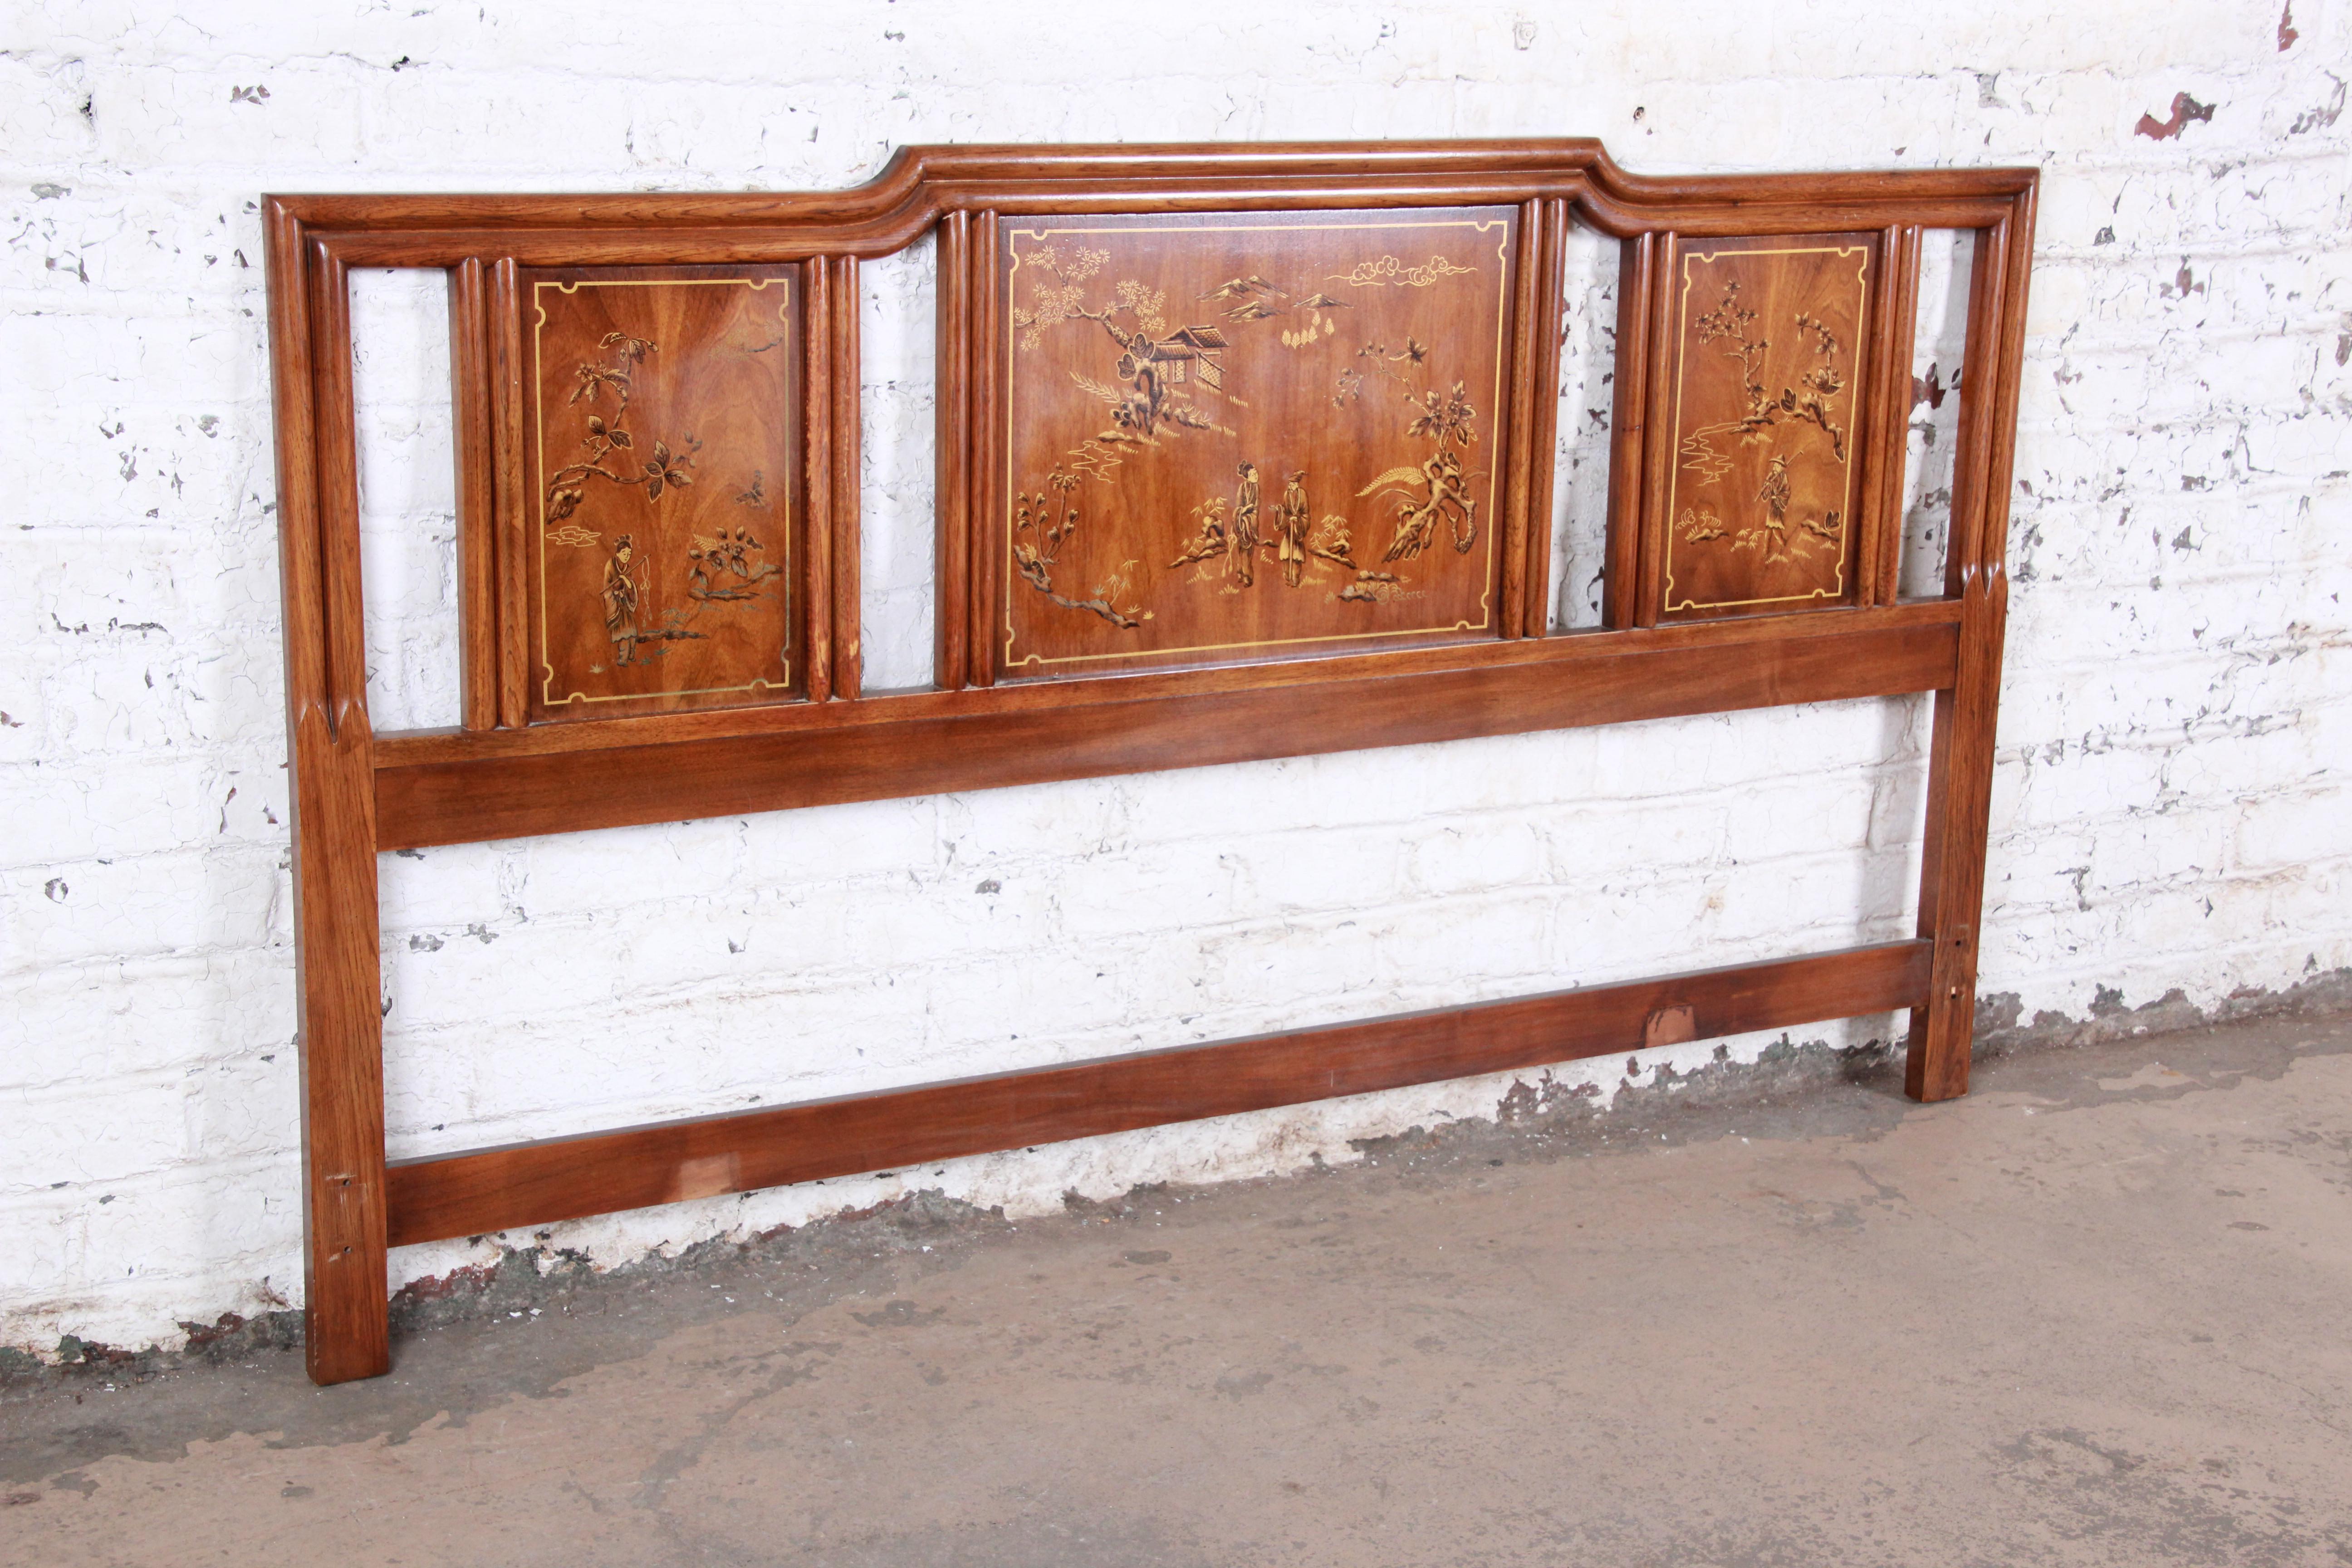 An exceptional Hollywood Regency chinoiserie king size headboard from the Dynasty Collection by Drexel Heritage. The headboard features gorgeous walnut wood grain and beautiful painted Asian nature scenes. The original label is present. It is in